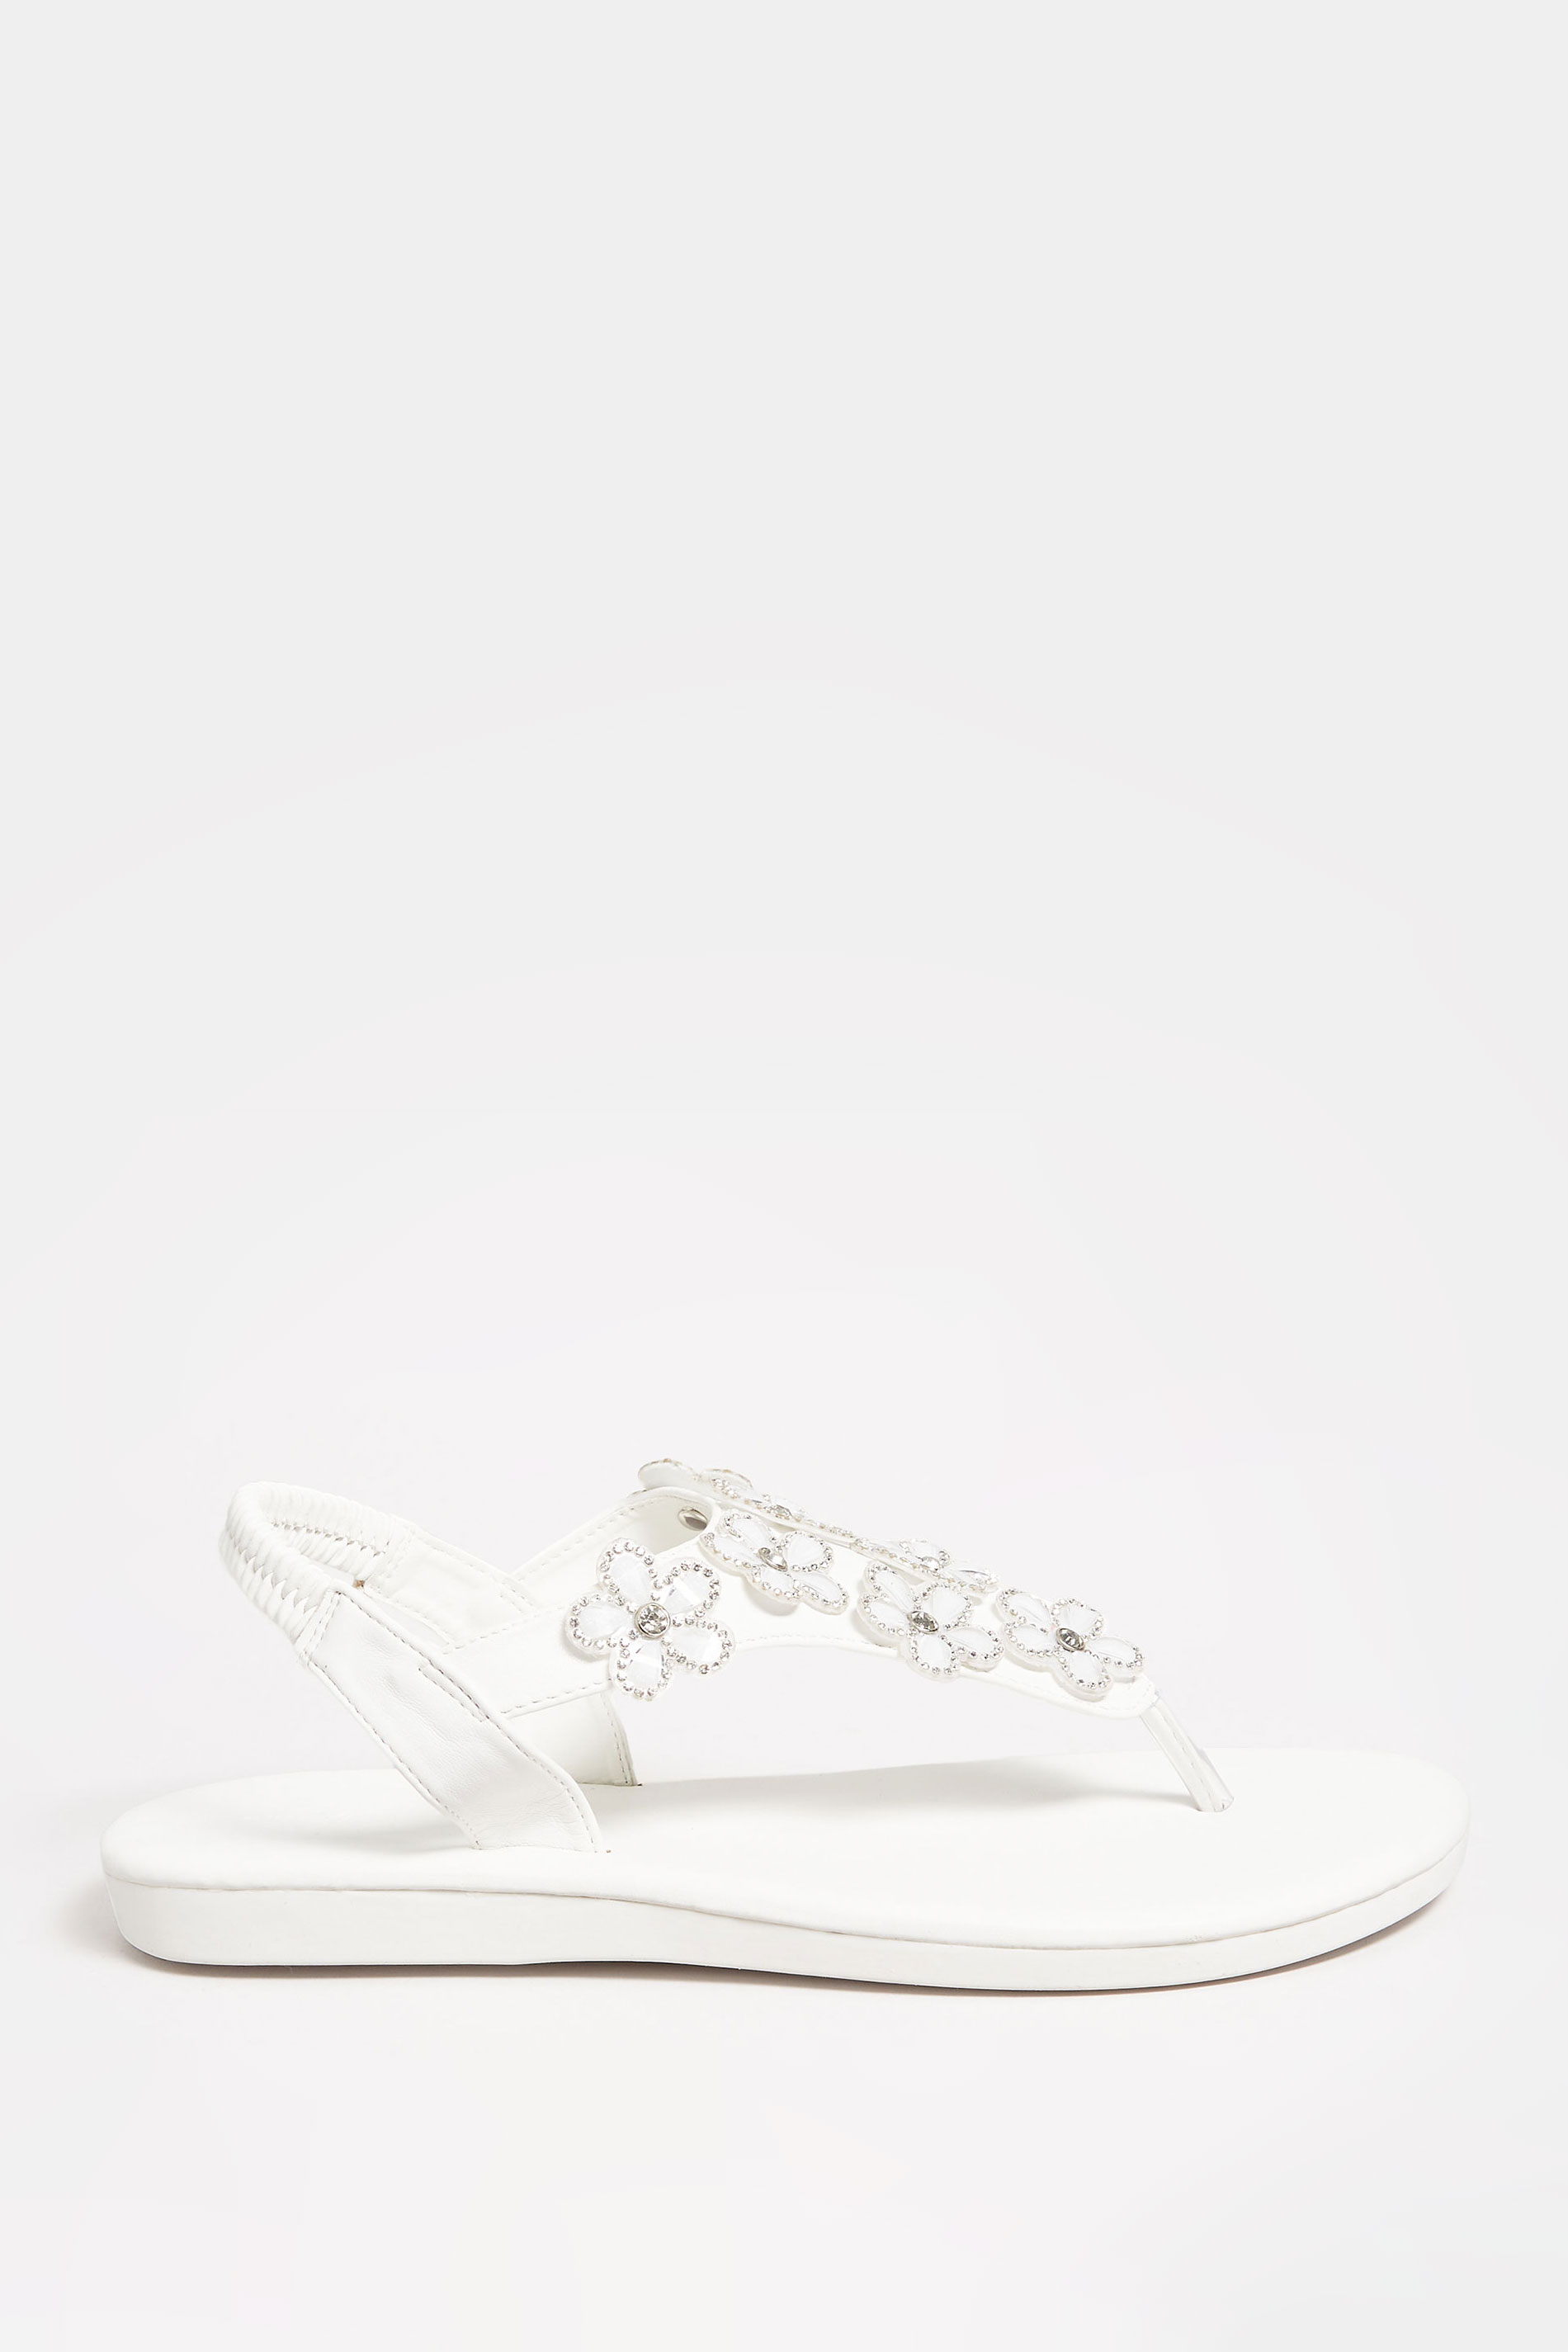 Plus Size White Diamante Flower Sandals In Wide E Fit & Extra Wide EEE Fit